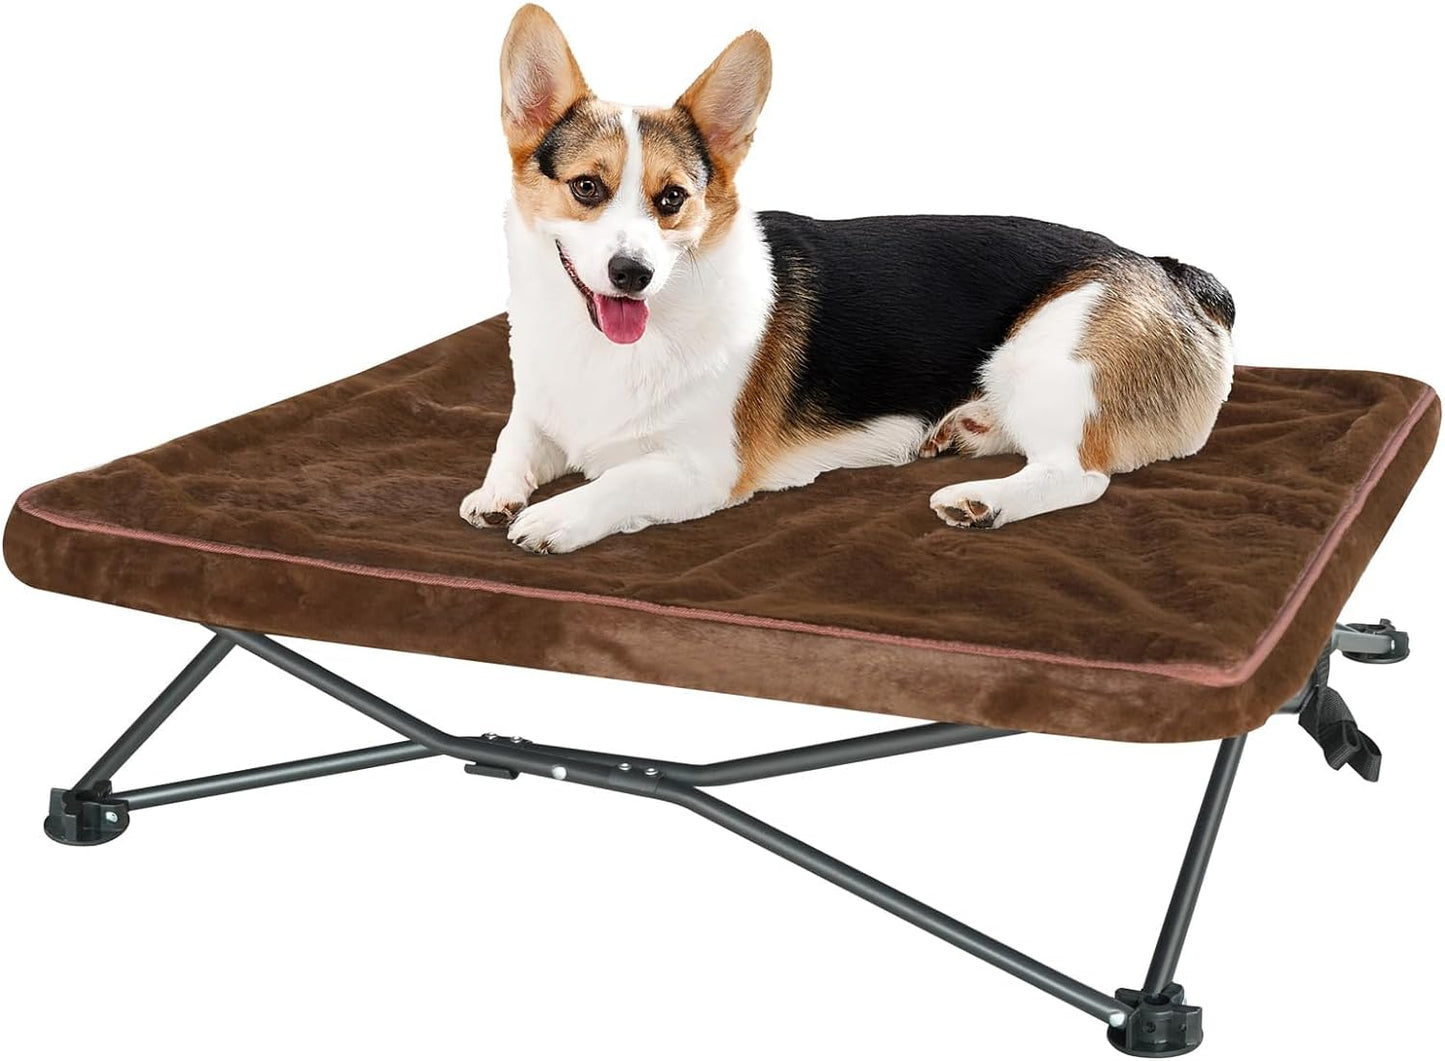 New Outdoor Dog Bed - Portable, Elevated Camping Dog Cot for Indoor, Courtyard & Travel, Breathable Textilene Mesh, Comfortable with Removable & Washable Cover, Supports up to 120 lbs (Brown)